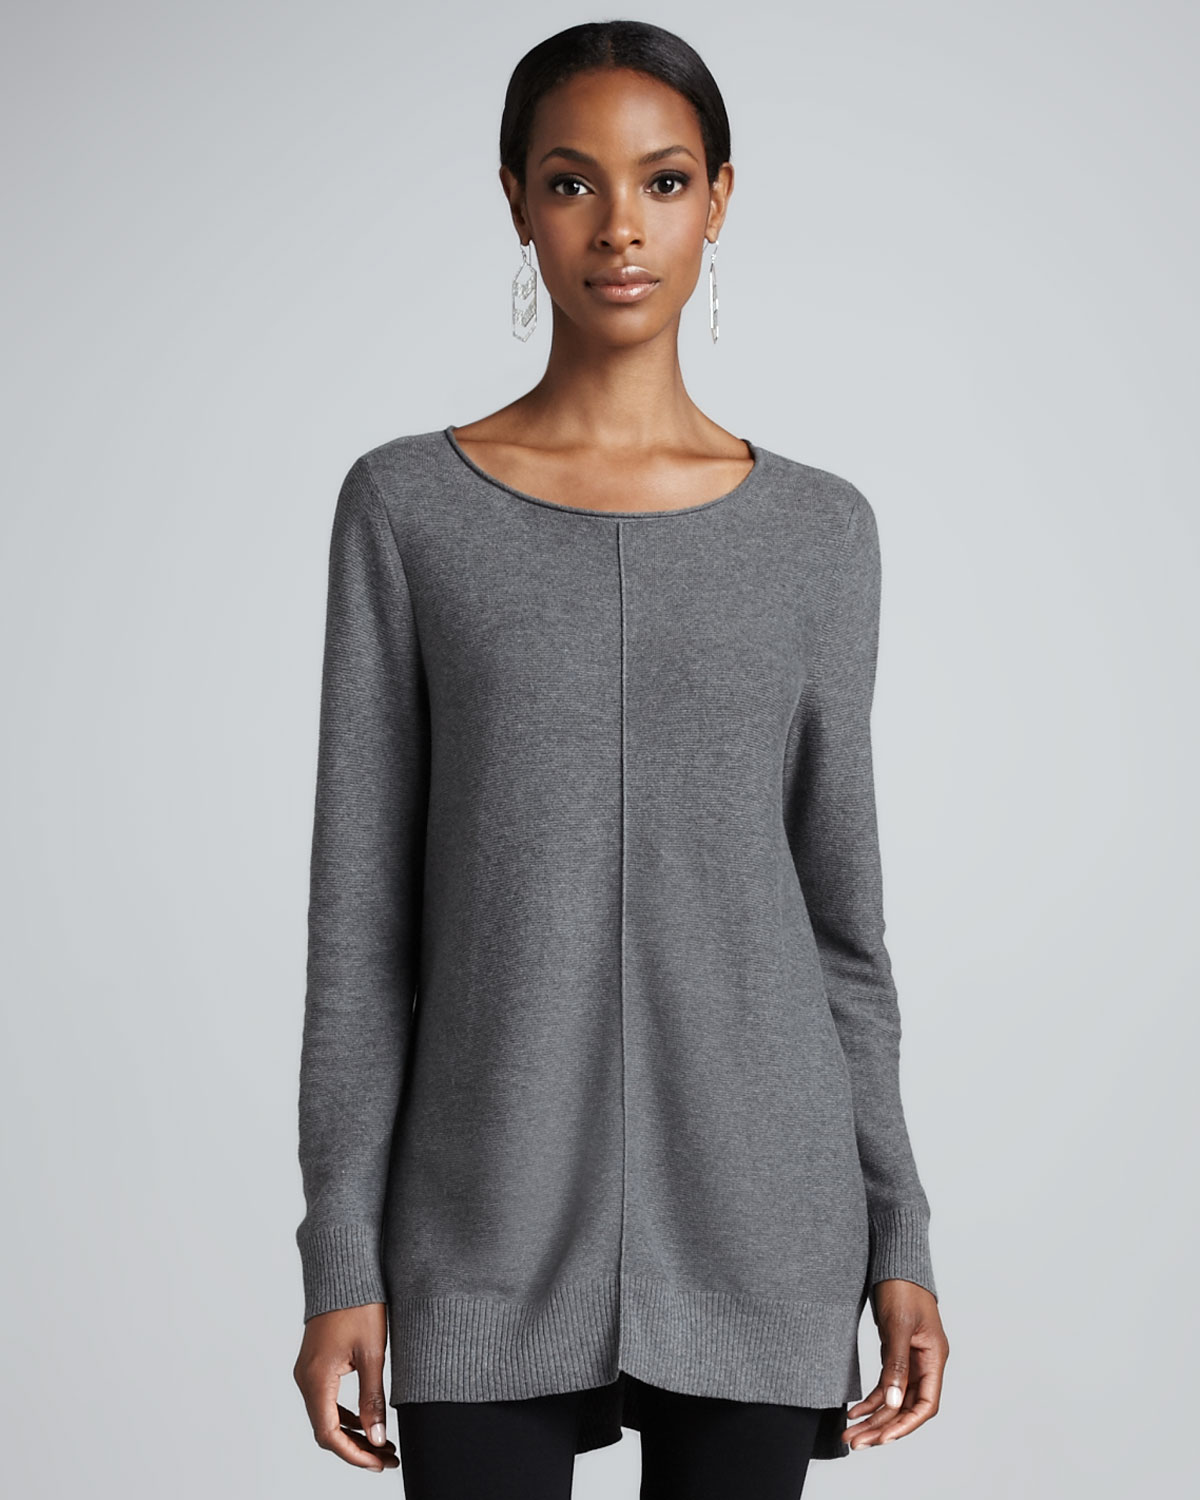 Lyst - Eileen Fisher Organic Cotton Links Tunic in Gray